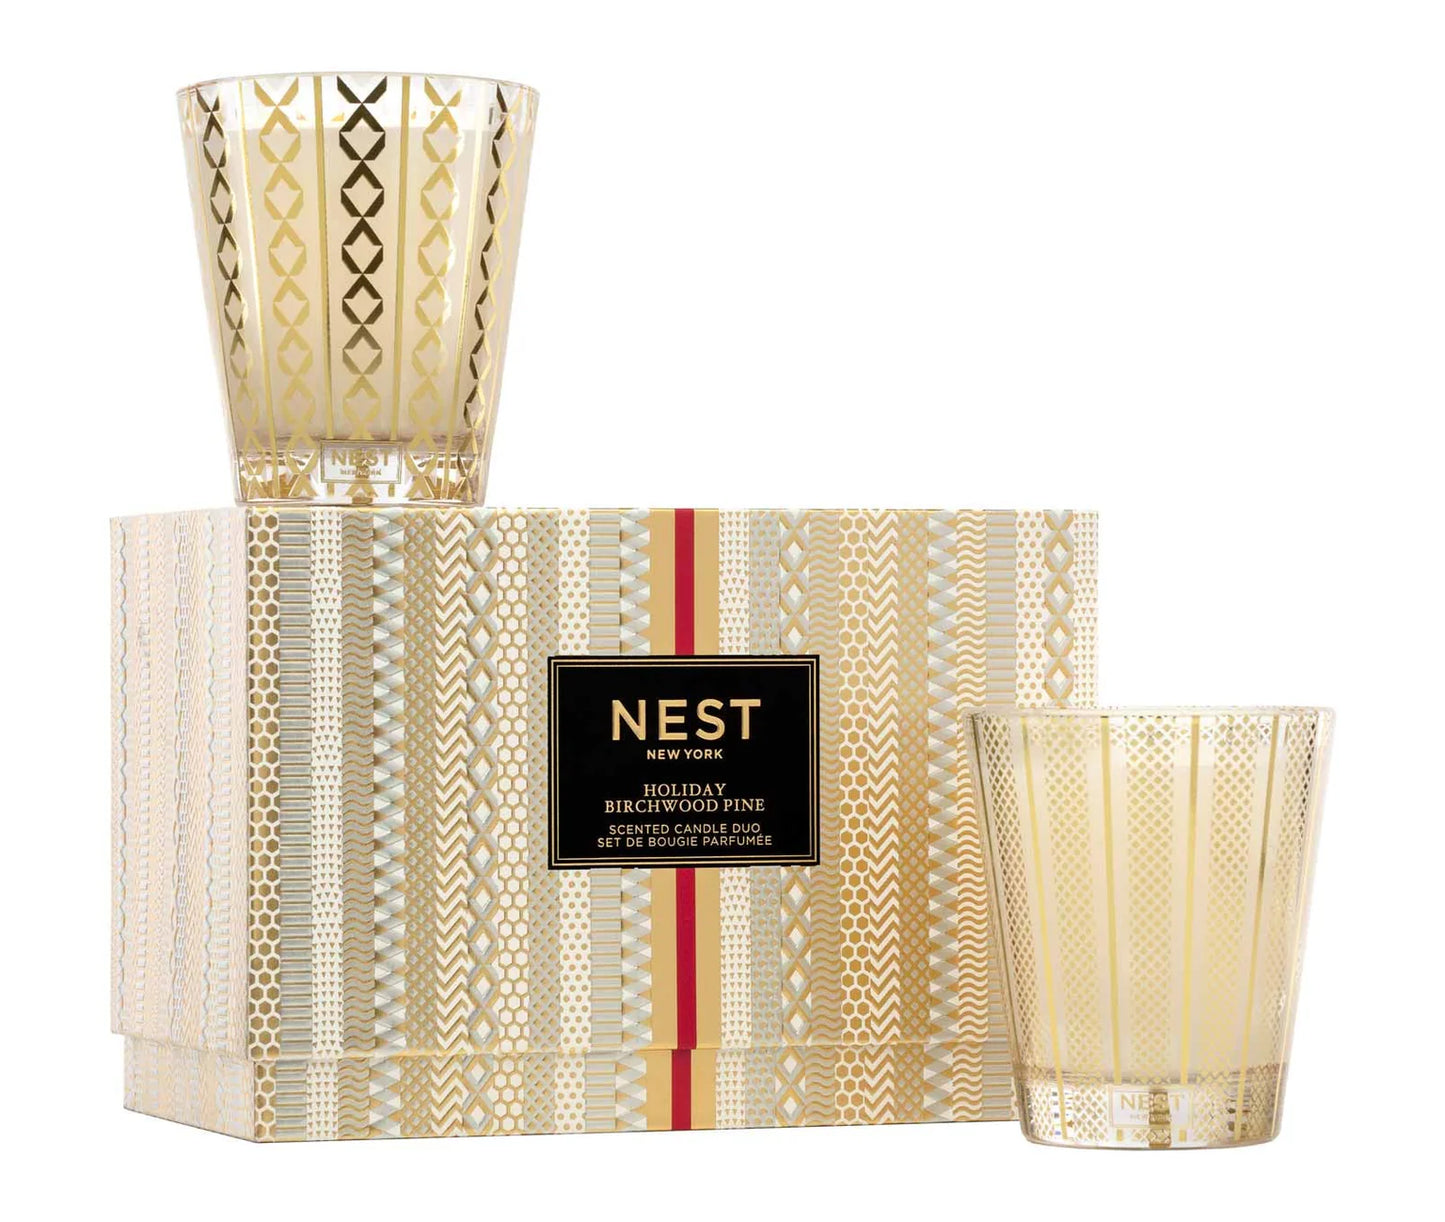 Classic Candle Duo Set - Holiday and Birchwood Pine